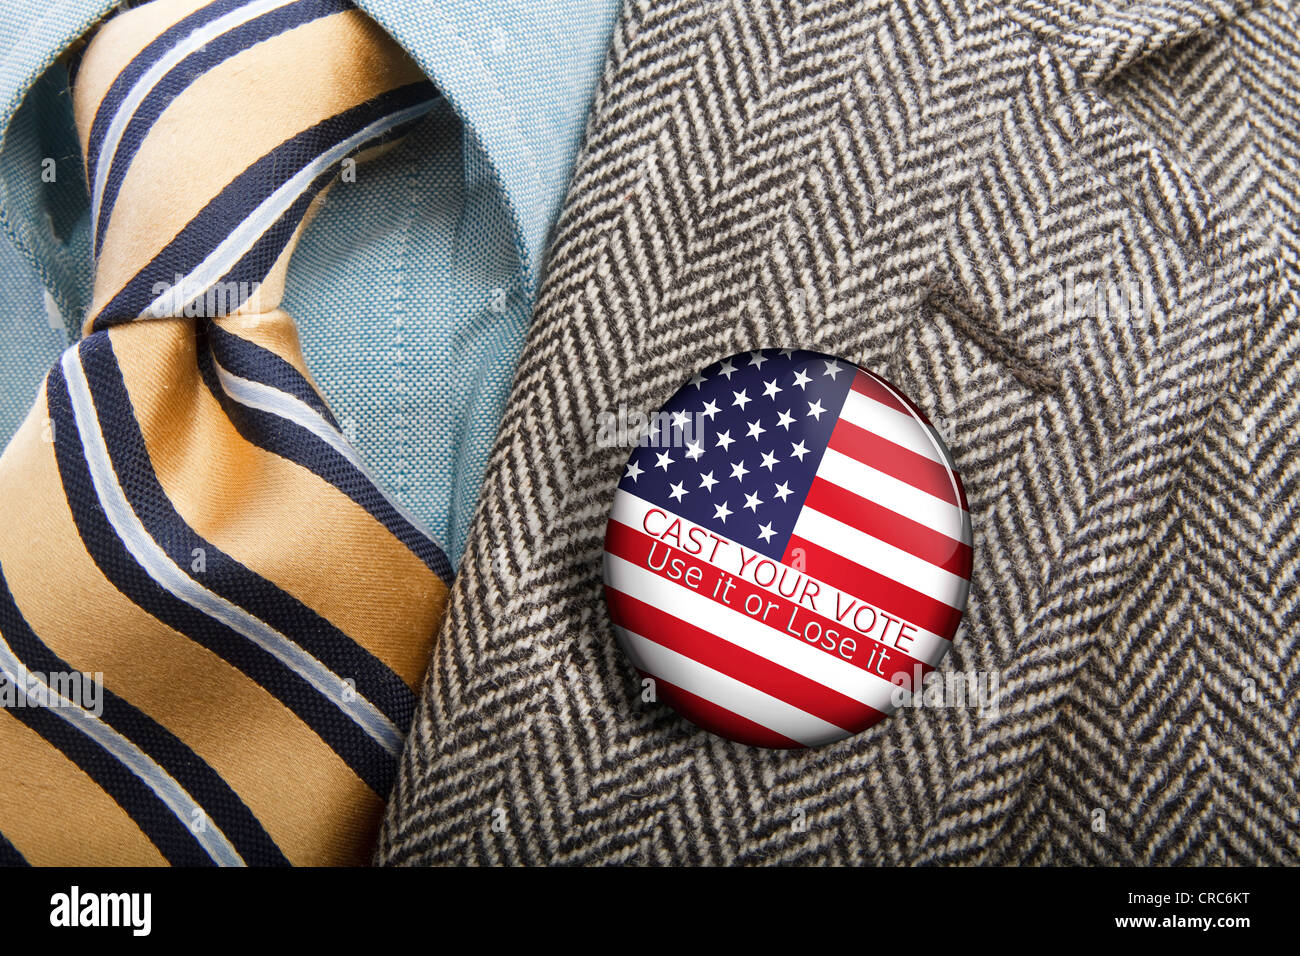 political button pinned to a man's jacket lapel urging people to vote Stock Photo